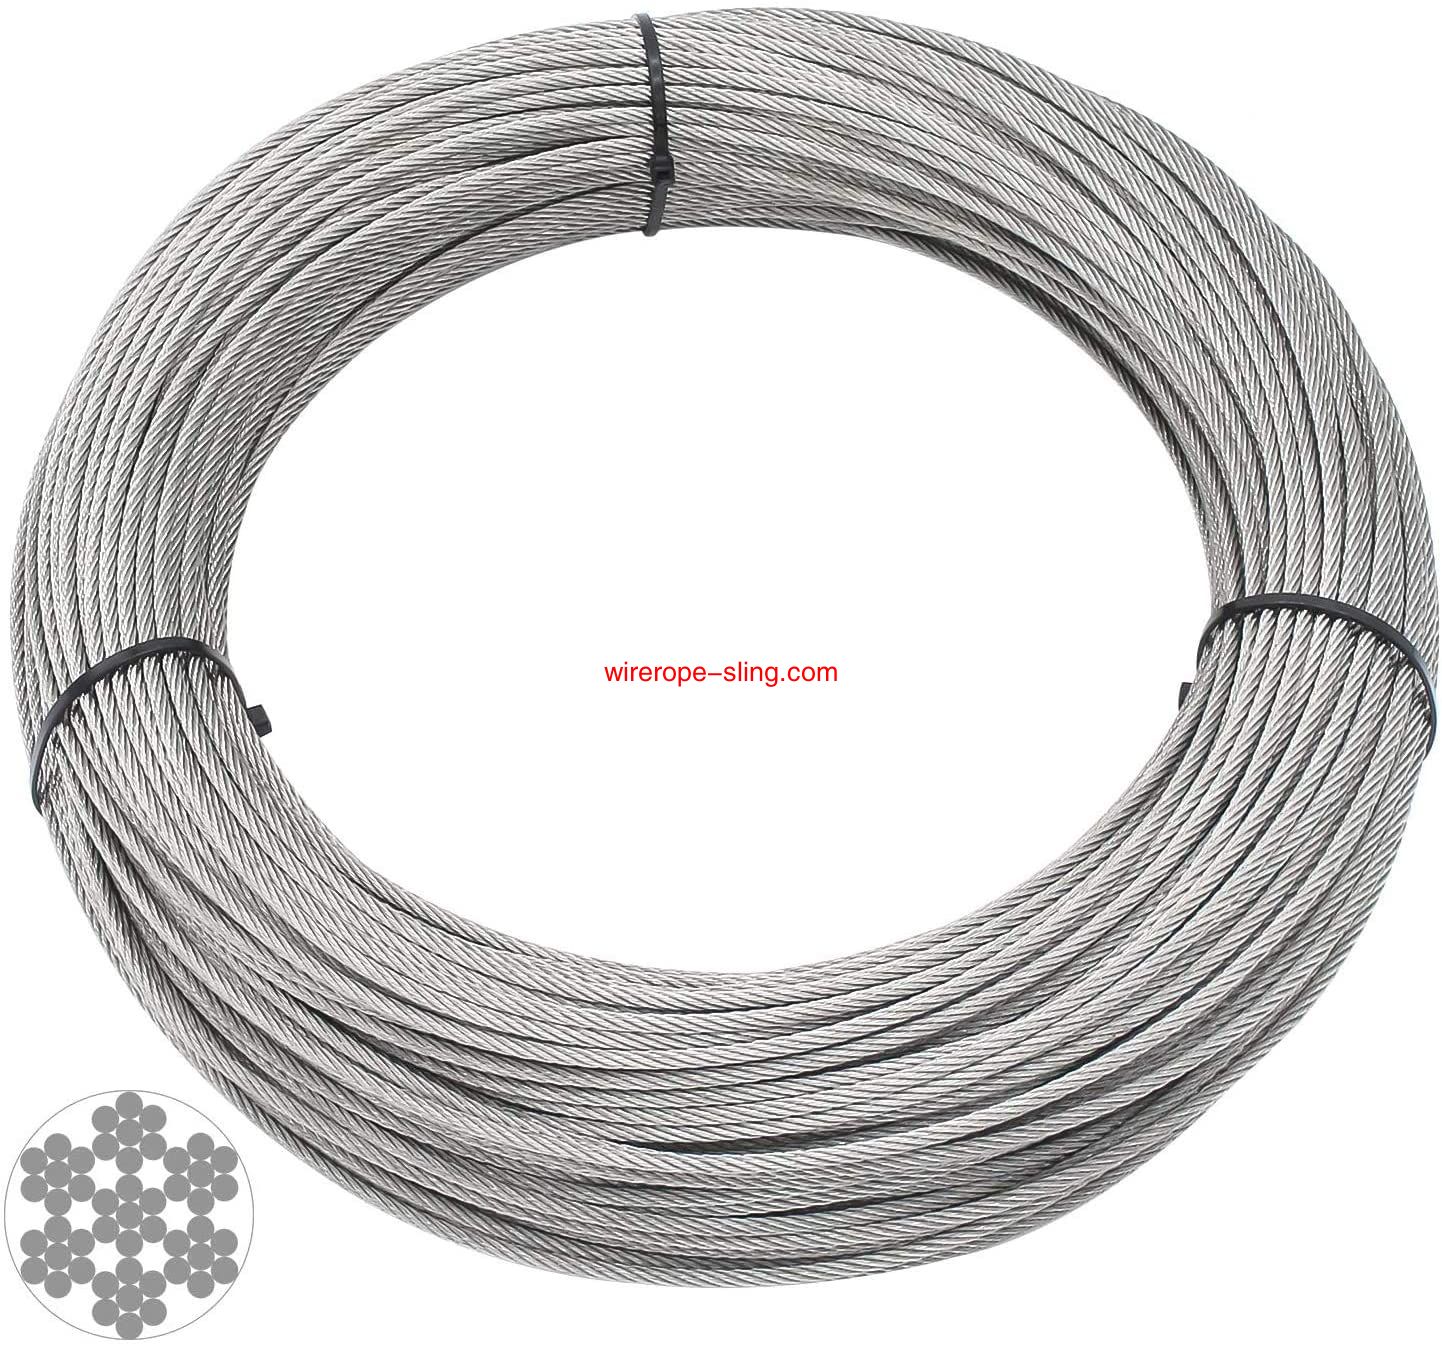 T316 Marineklasse 3mm Stainless Steel Aircraft Wire Rope Cable for Railing, Decking, DIY Balustrade, 100 Feet